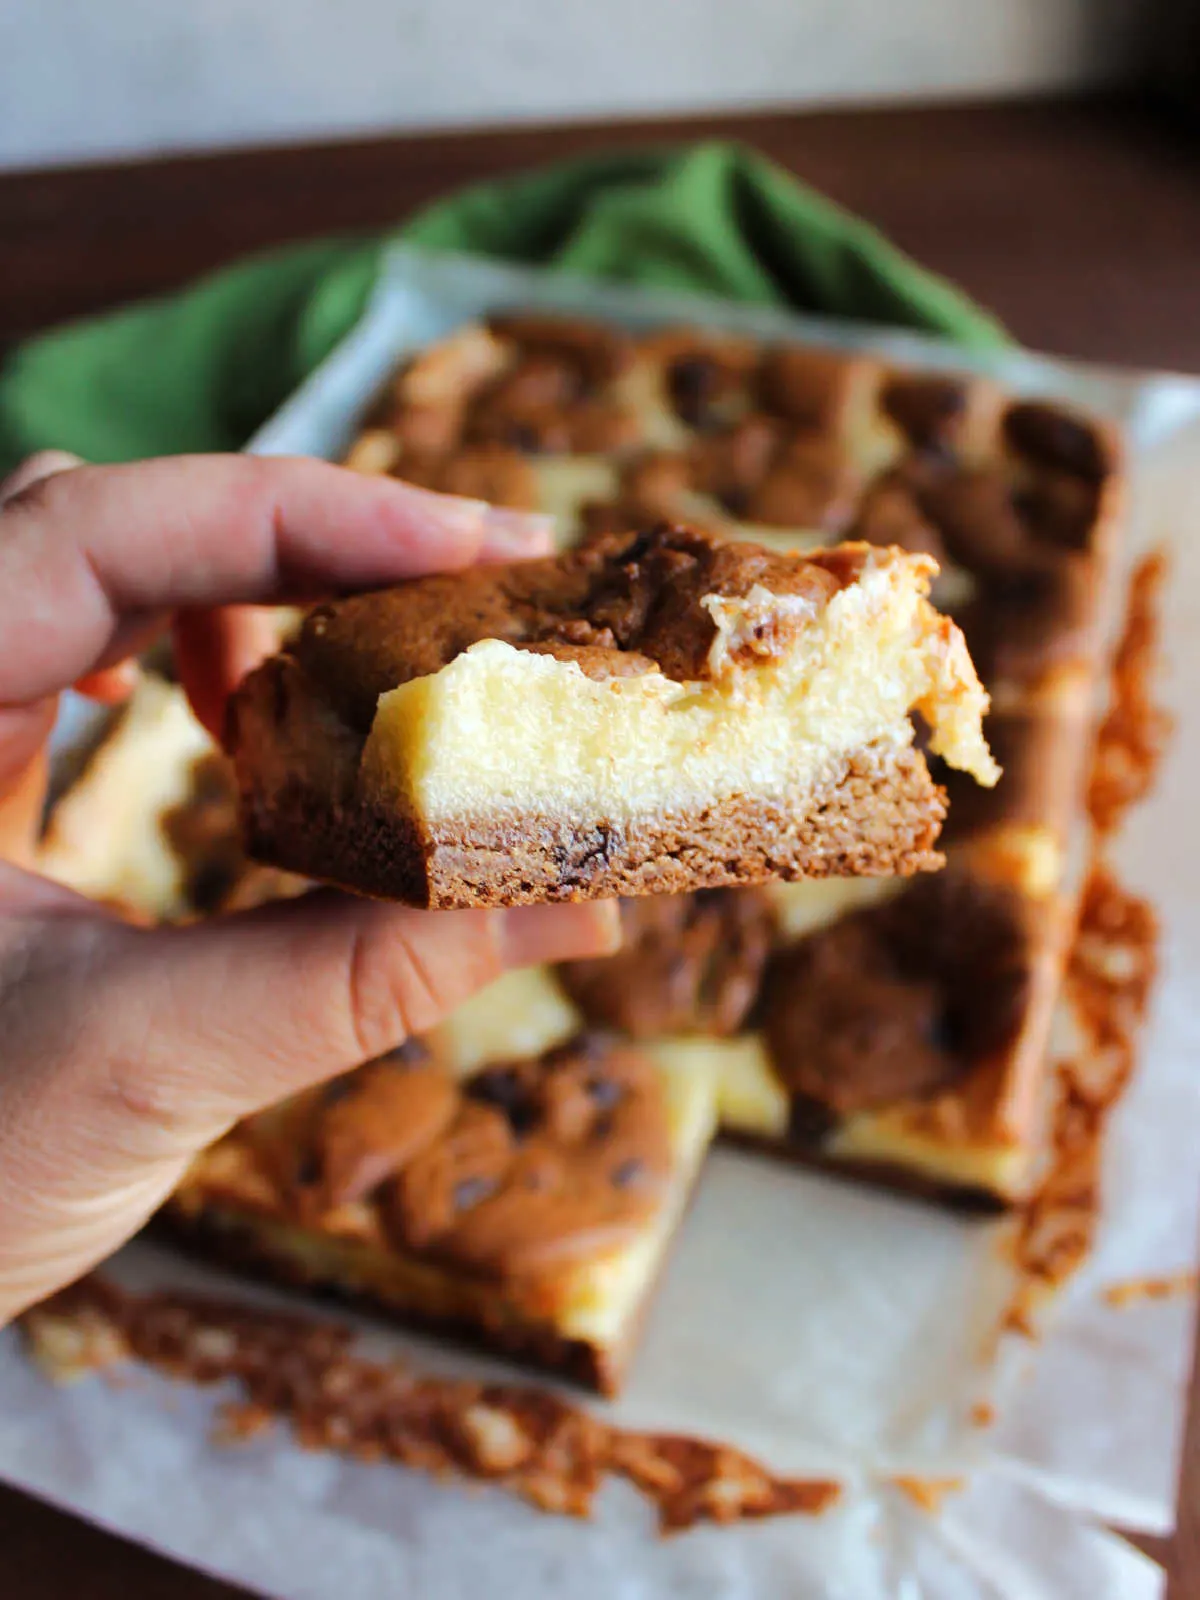 Hand holding cheesecake bar showing chocolate chip cookies surrounding smooth cream cheese filling.